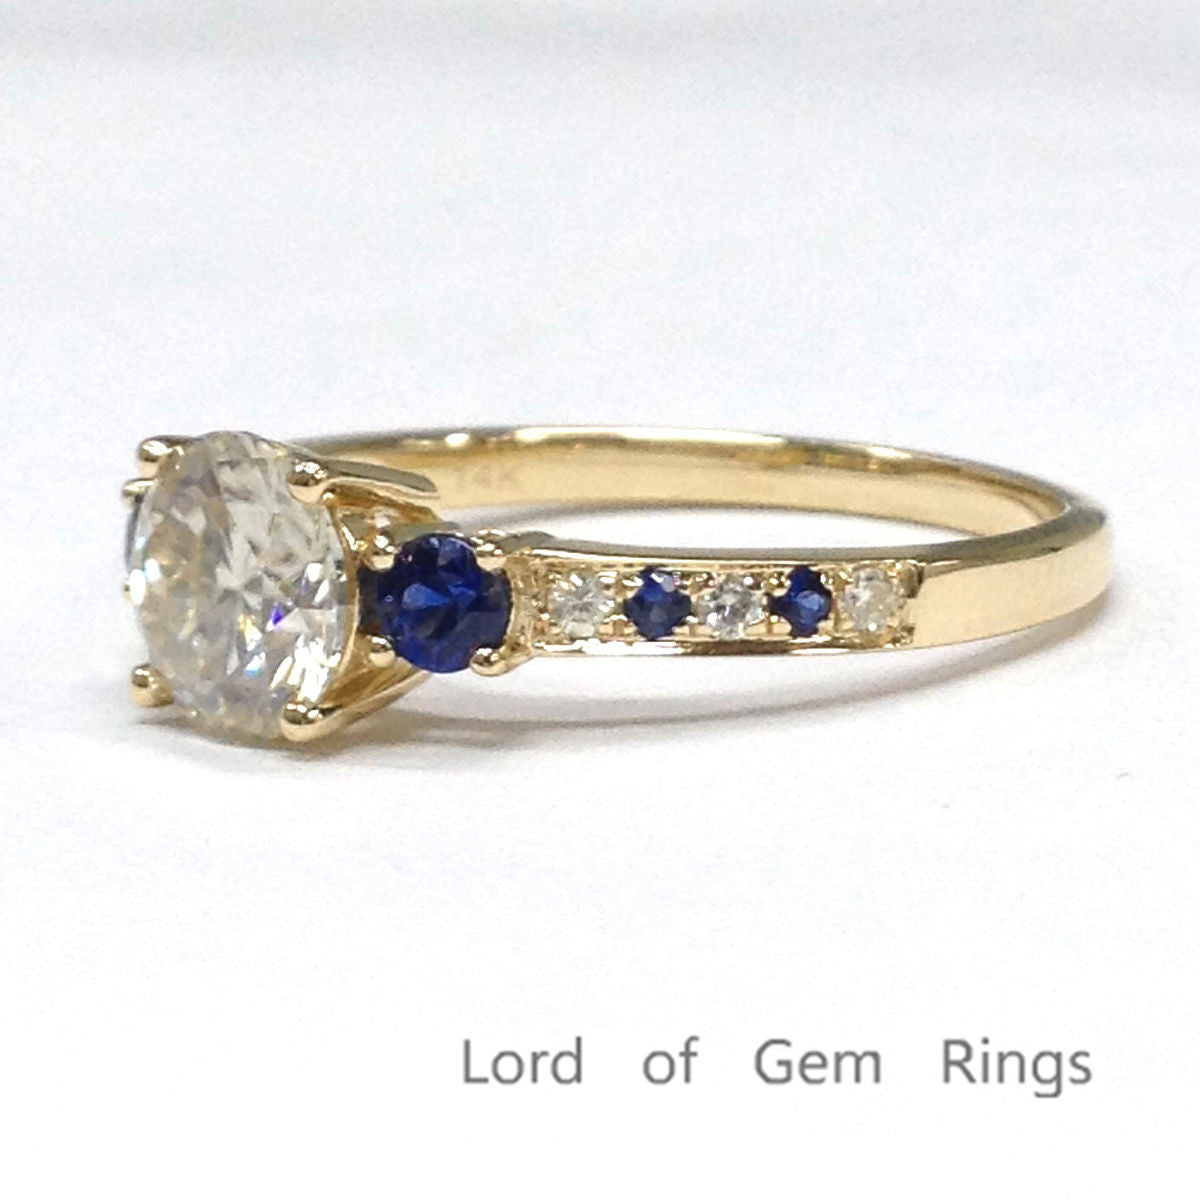 Round Moissanite Engagement Ring Pave Sapphire Moissanite Wedding 14K Yellow Gold 6.5mm - Lord of Gem Rings - 2